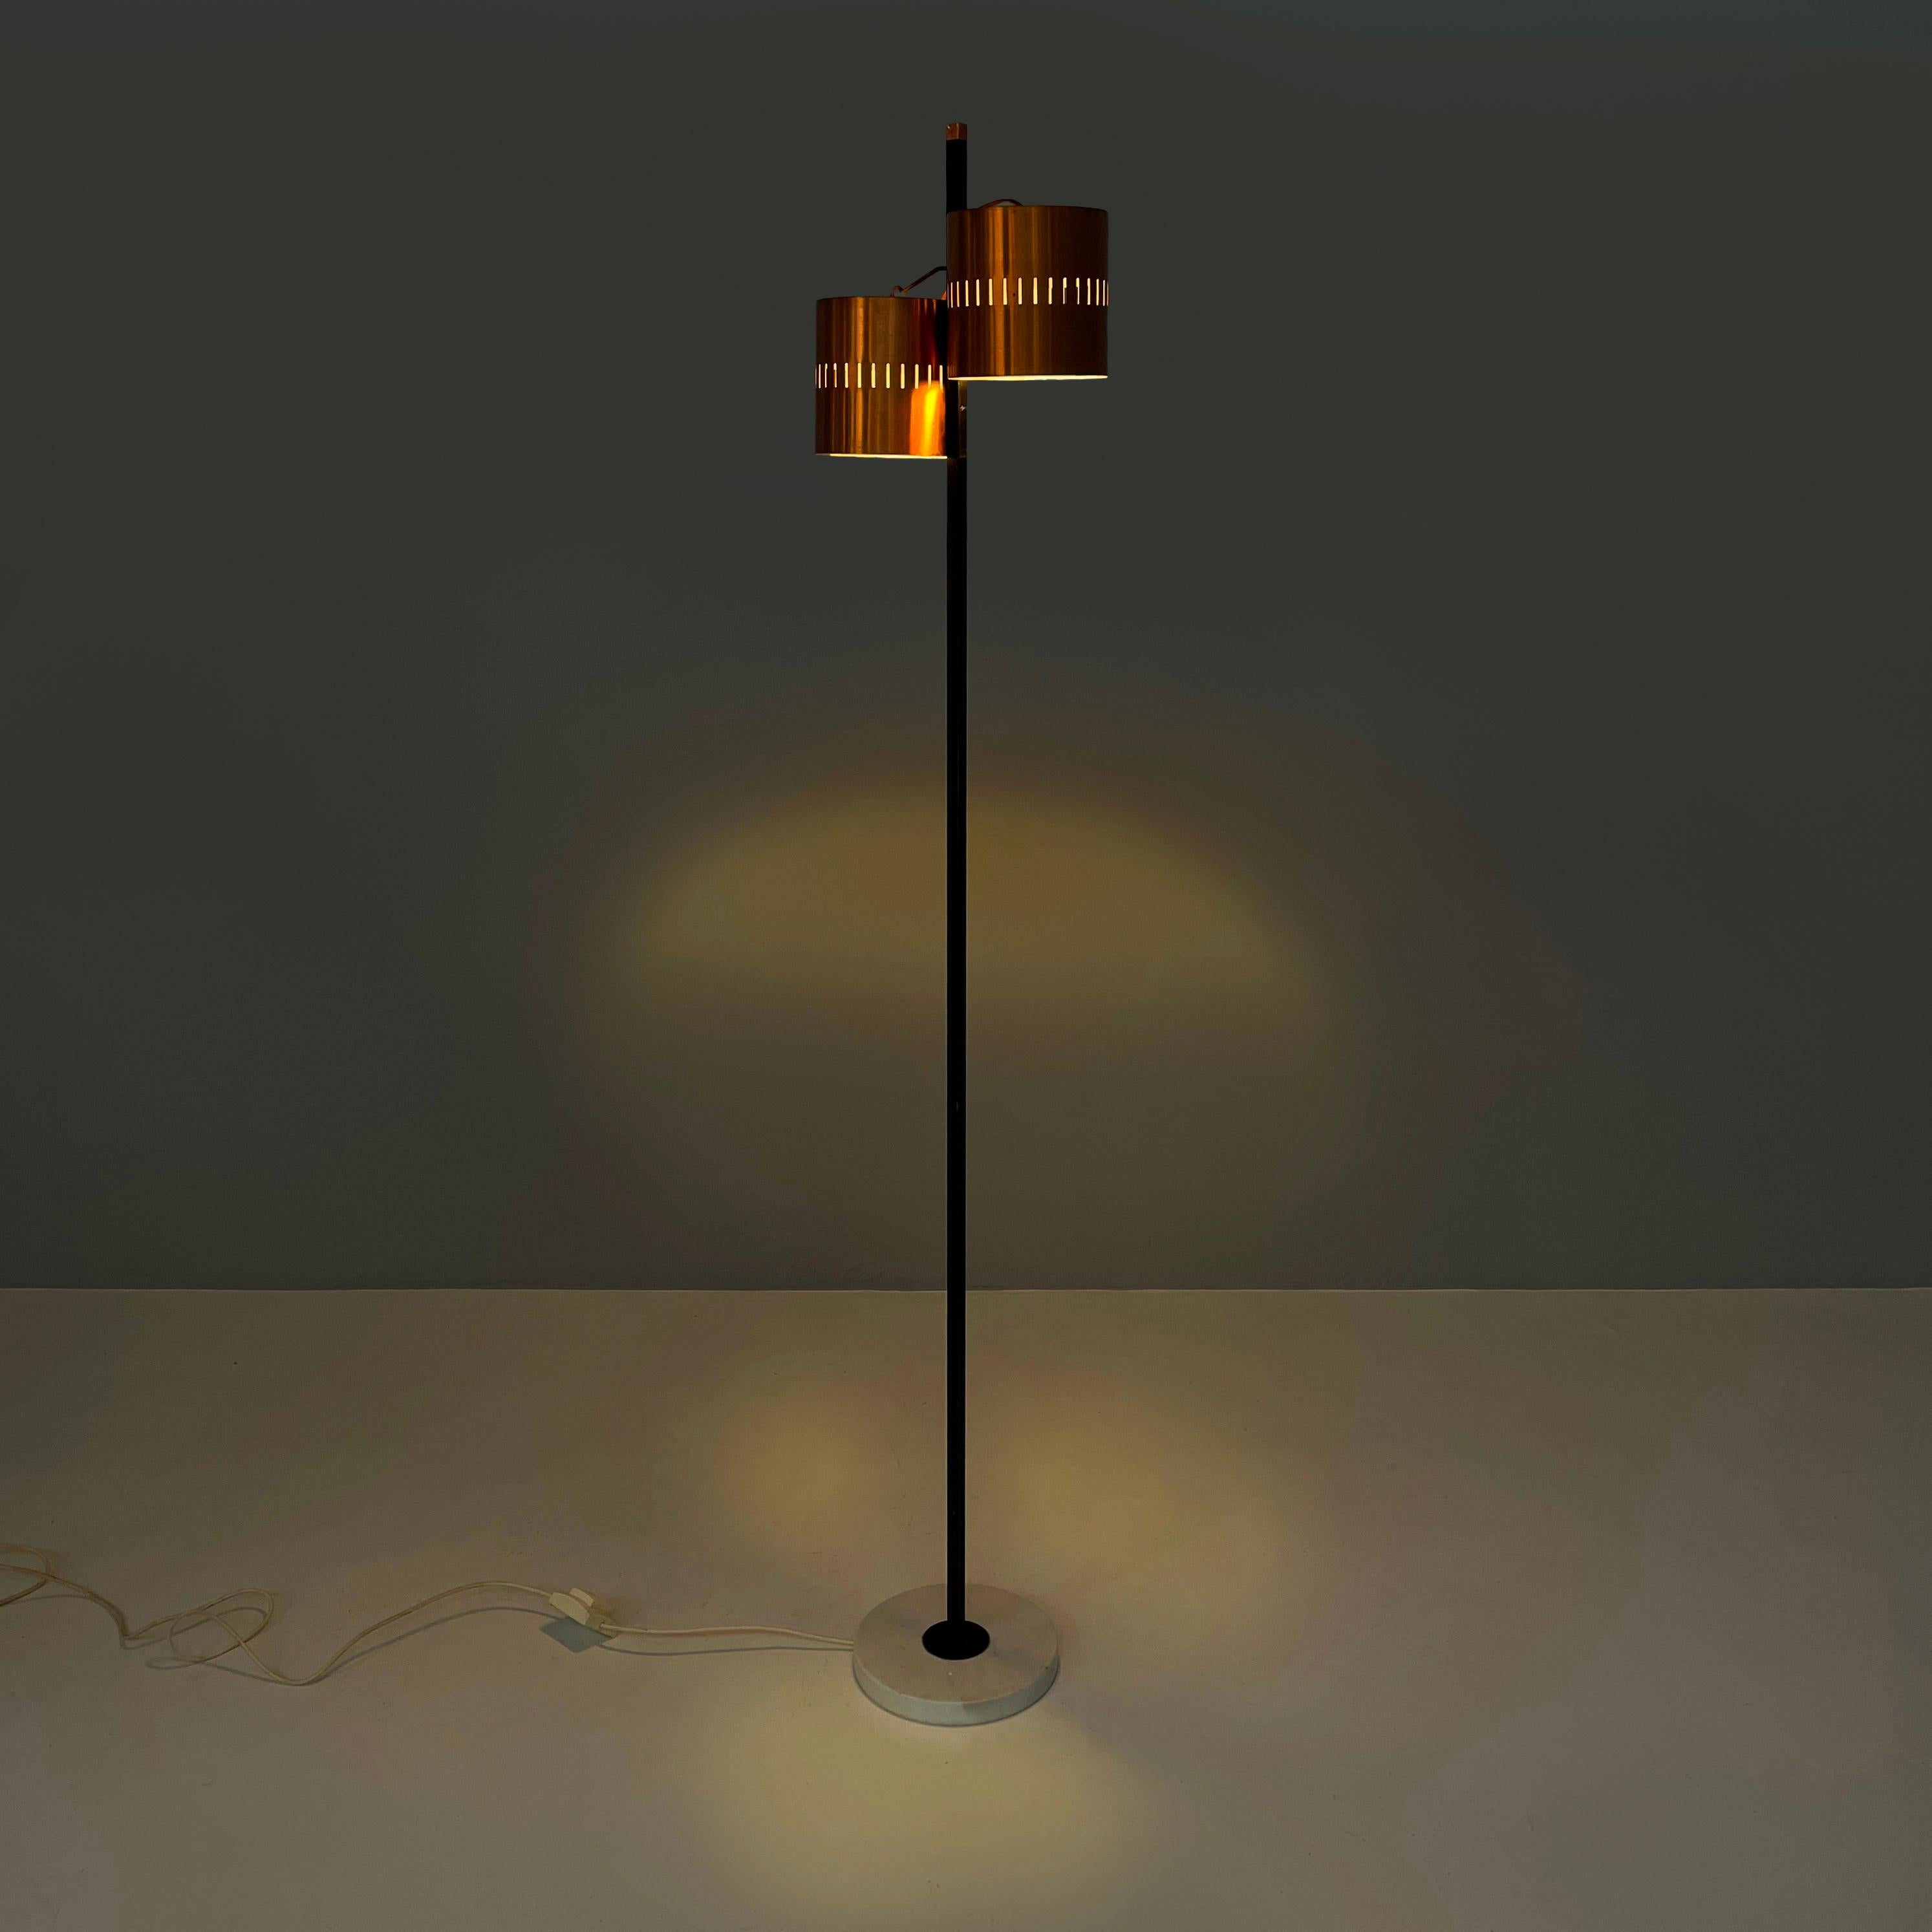 Italian mid-century modern Floor lamp in copper, black metal and marble, 1960s
Floor lamp with double cylindrical copper diffuser. The structure is in black painted metal with a square section, with a copper detail in the upper part. Round base in